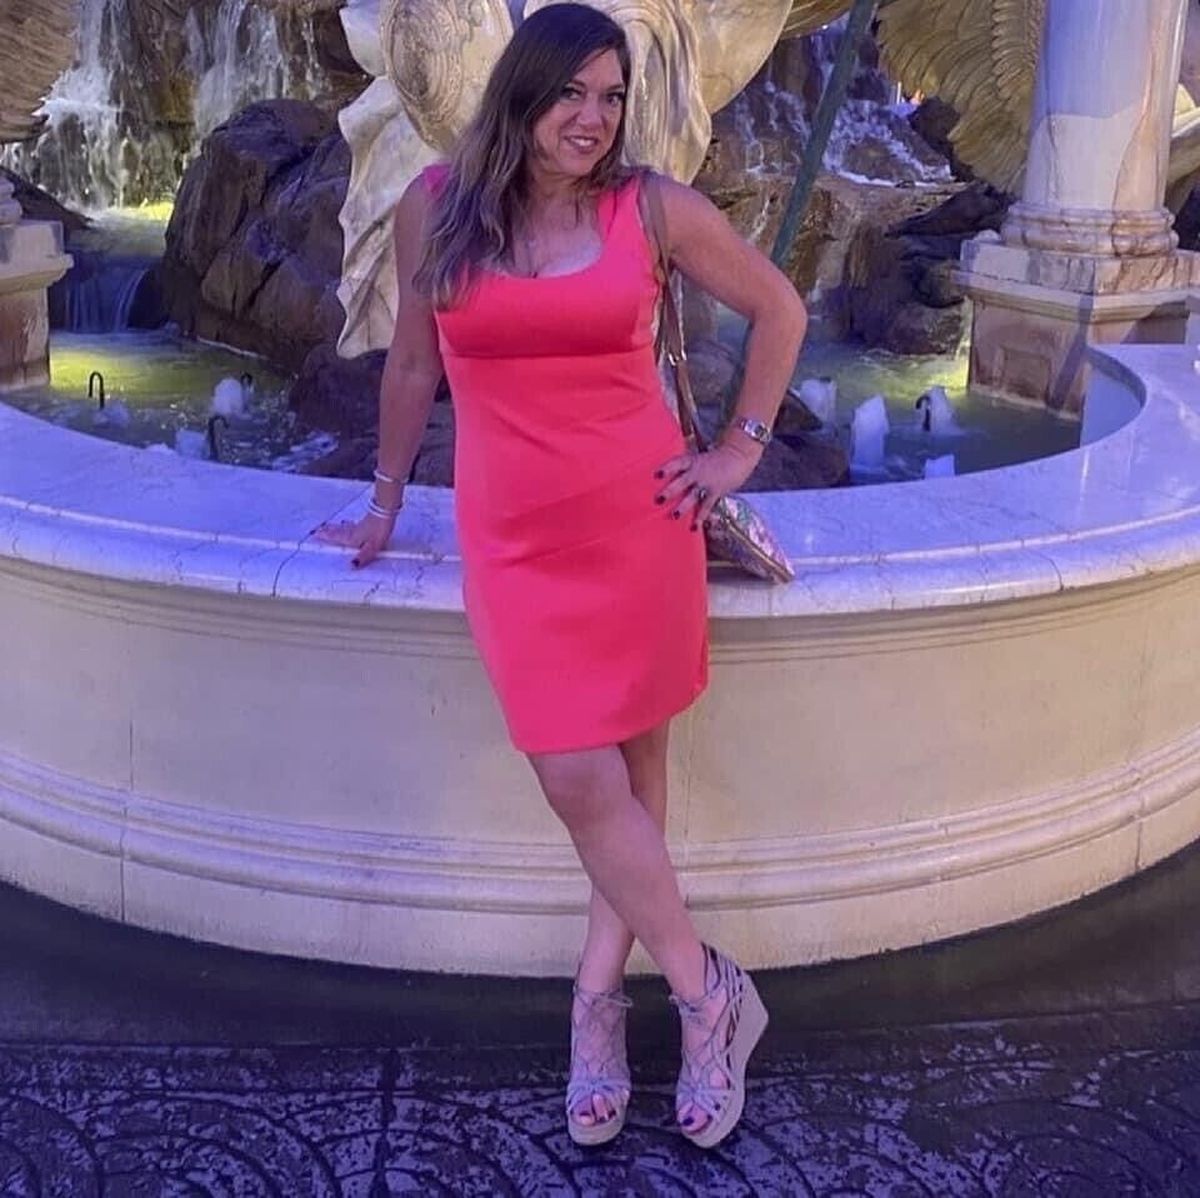 This June 1, 2021 photo provided by Liz Segel shows Estelle Hedaya at Caesars Palace in Las Vegas. Ikey Hedaya is still waiting for closure almost a month after the Surfside condo collapse. He has given his DNA, talks frequently with the medical examiner and even reluctantly visited the collapse site to see for himself what is being done to find his big sister. Fifty-four-year-old Estelle Hedaya appears to be the only missing victim yet to be identified after the June 24 collapse.  (HONS)